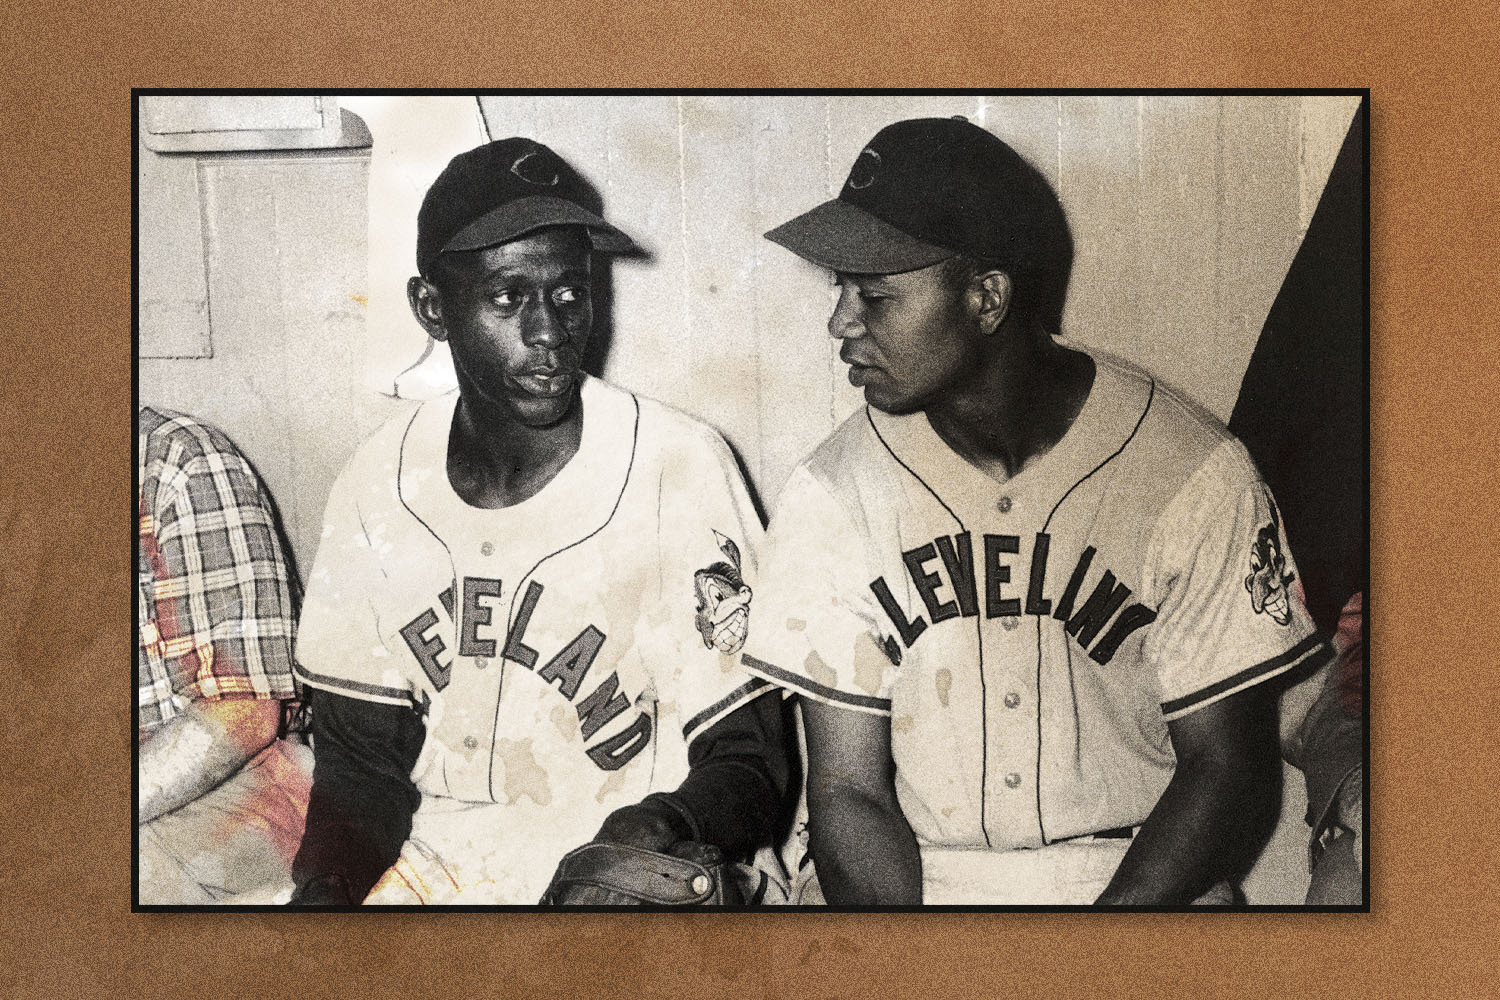 Satchel Paige played for the Cleveland Indians from 1948–1949 and Larry Doby played for the Cleveland Indians from 1947-1955.